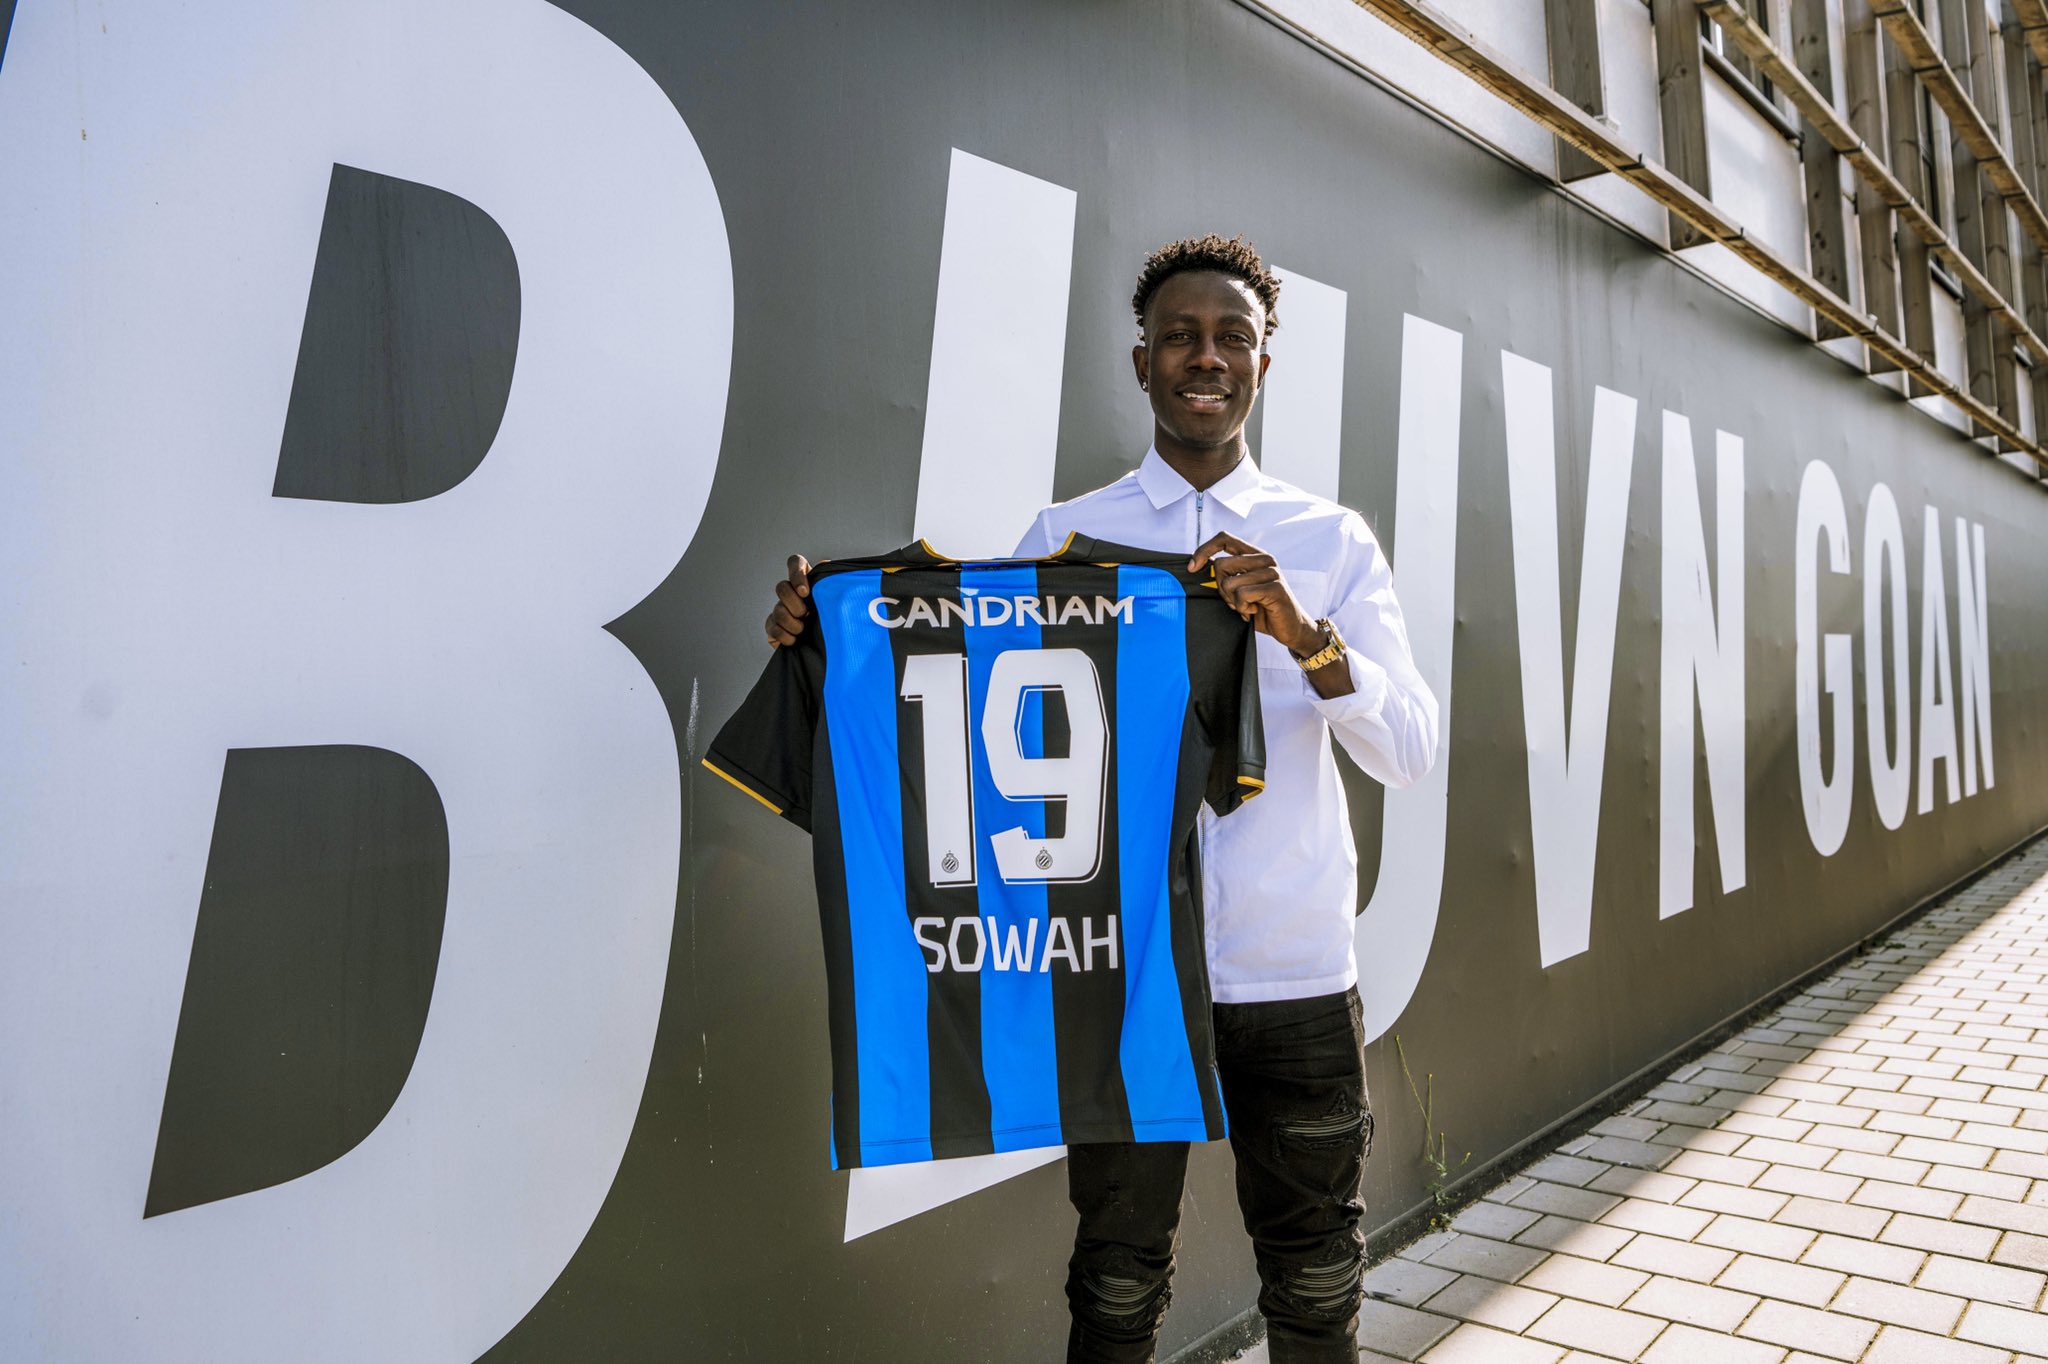 OH Leuven manager heaps praise on former player Kamal Sowah after move to Club Brugge